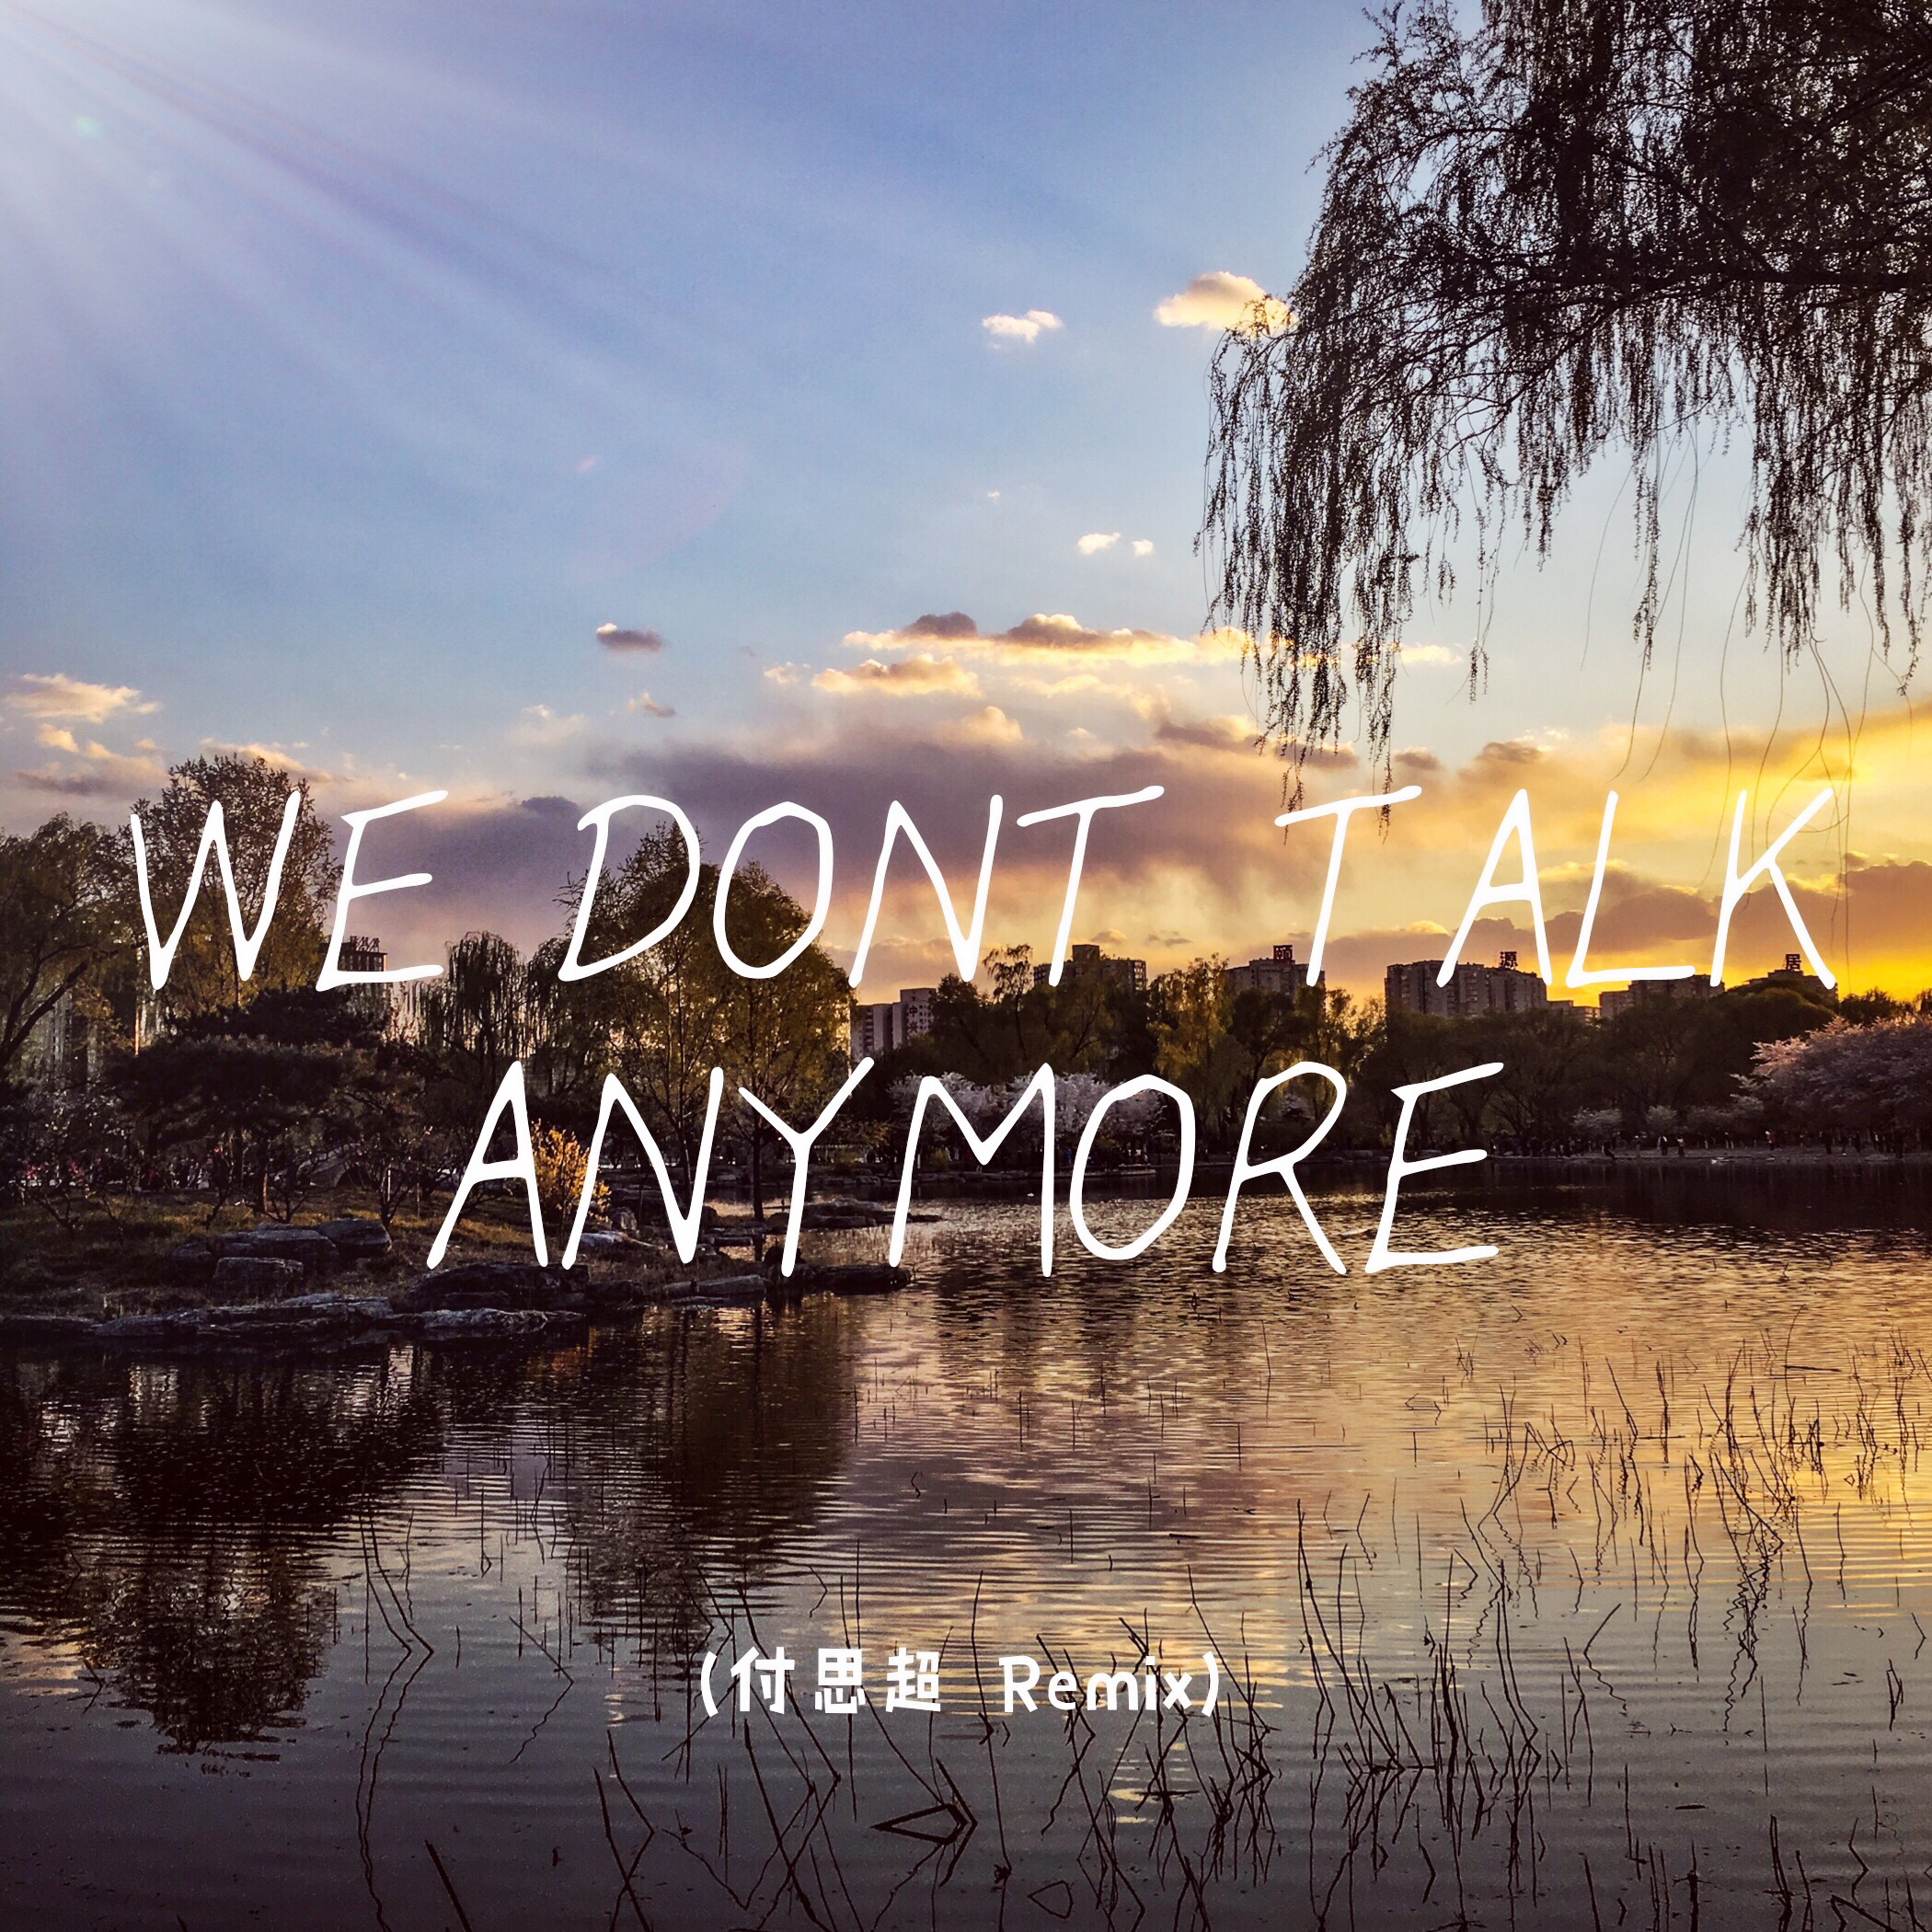 We Don' t Talk Anymore fu si chao Remix